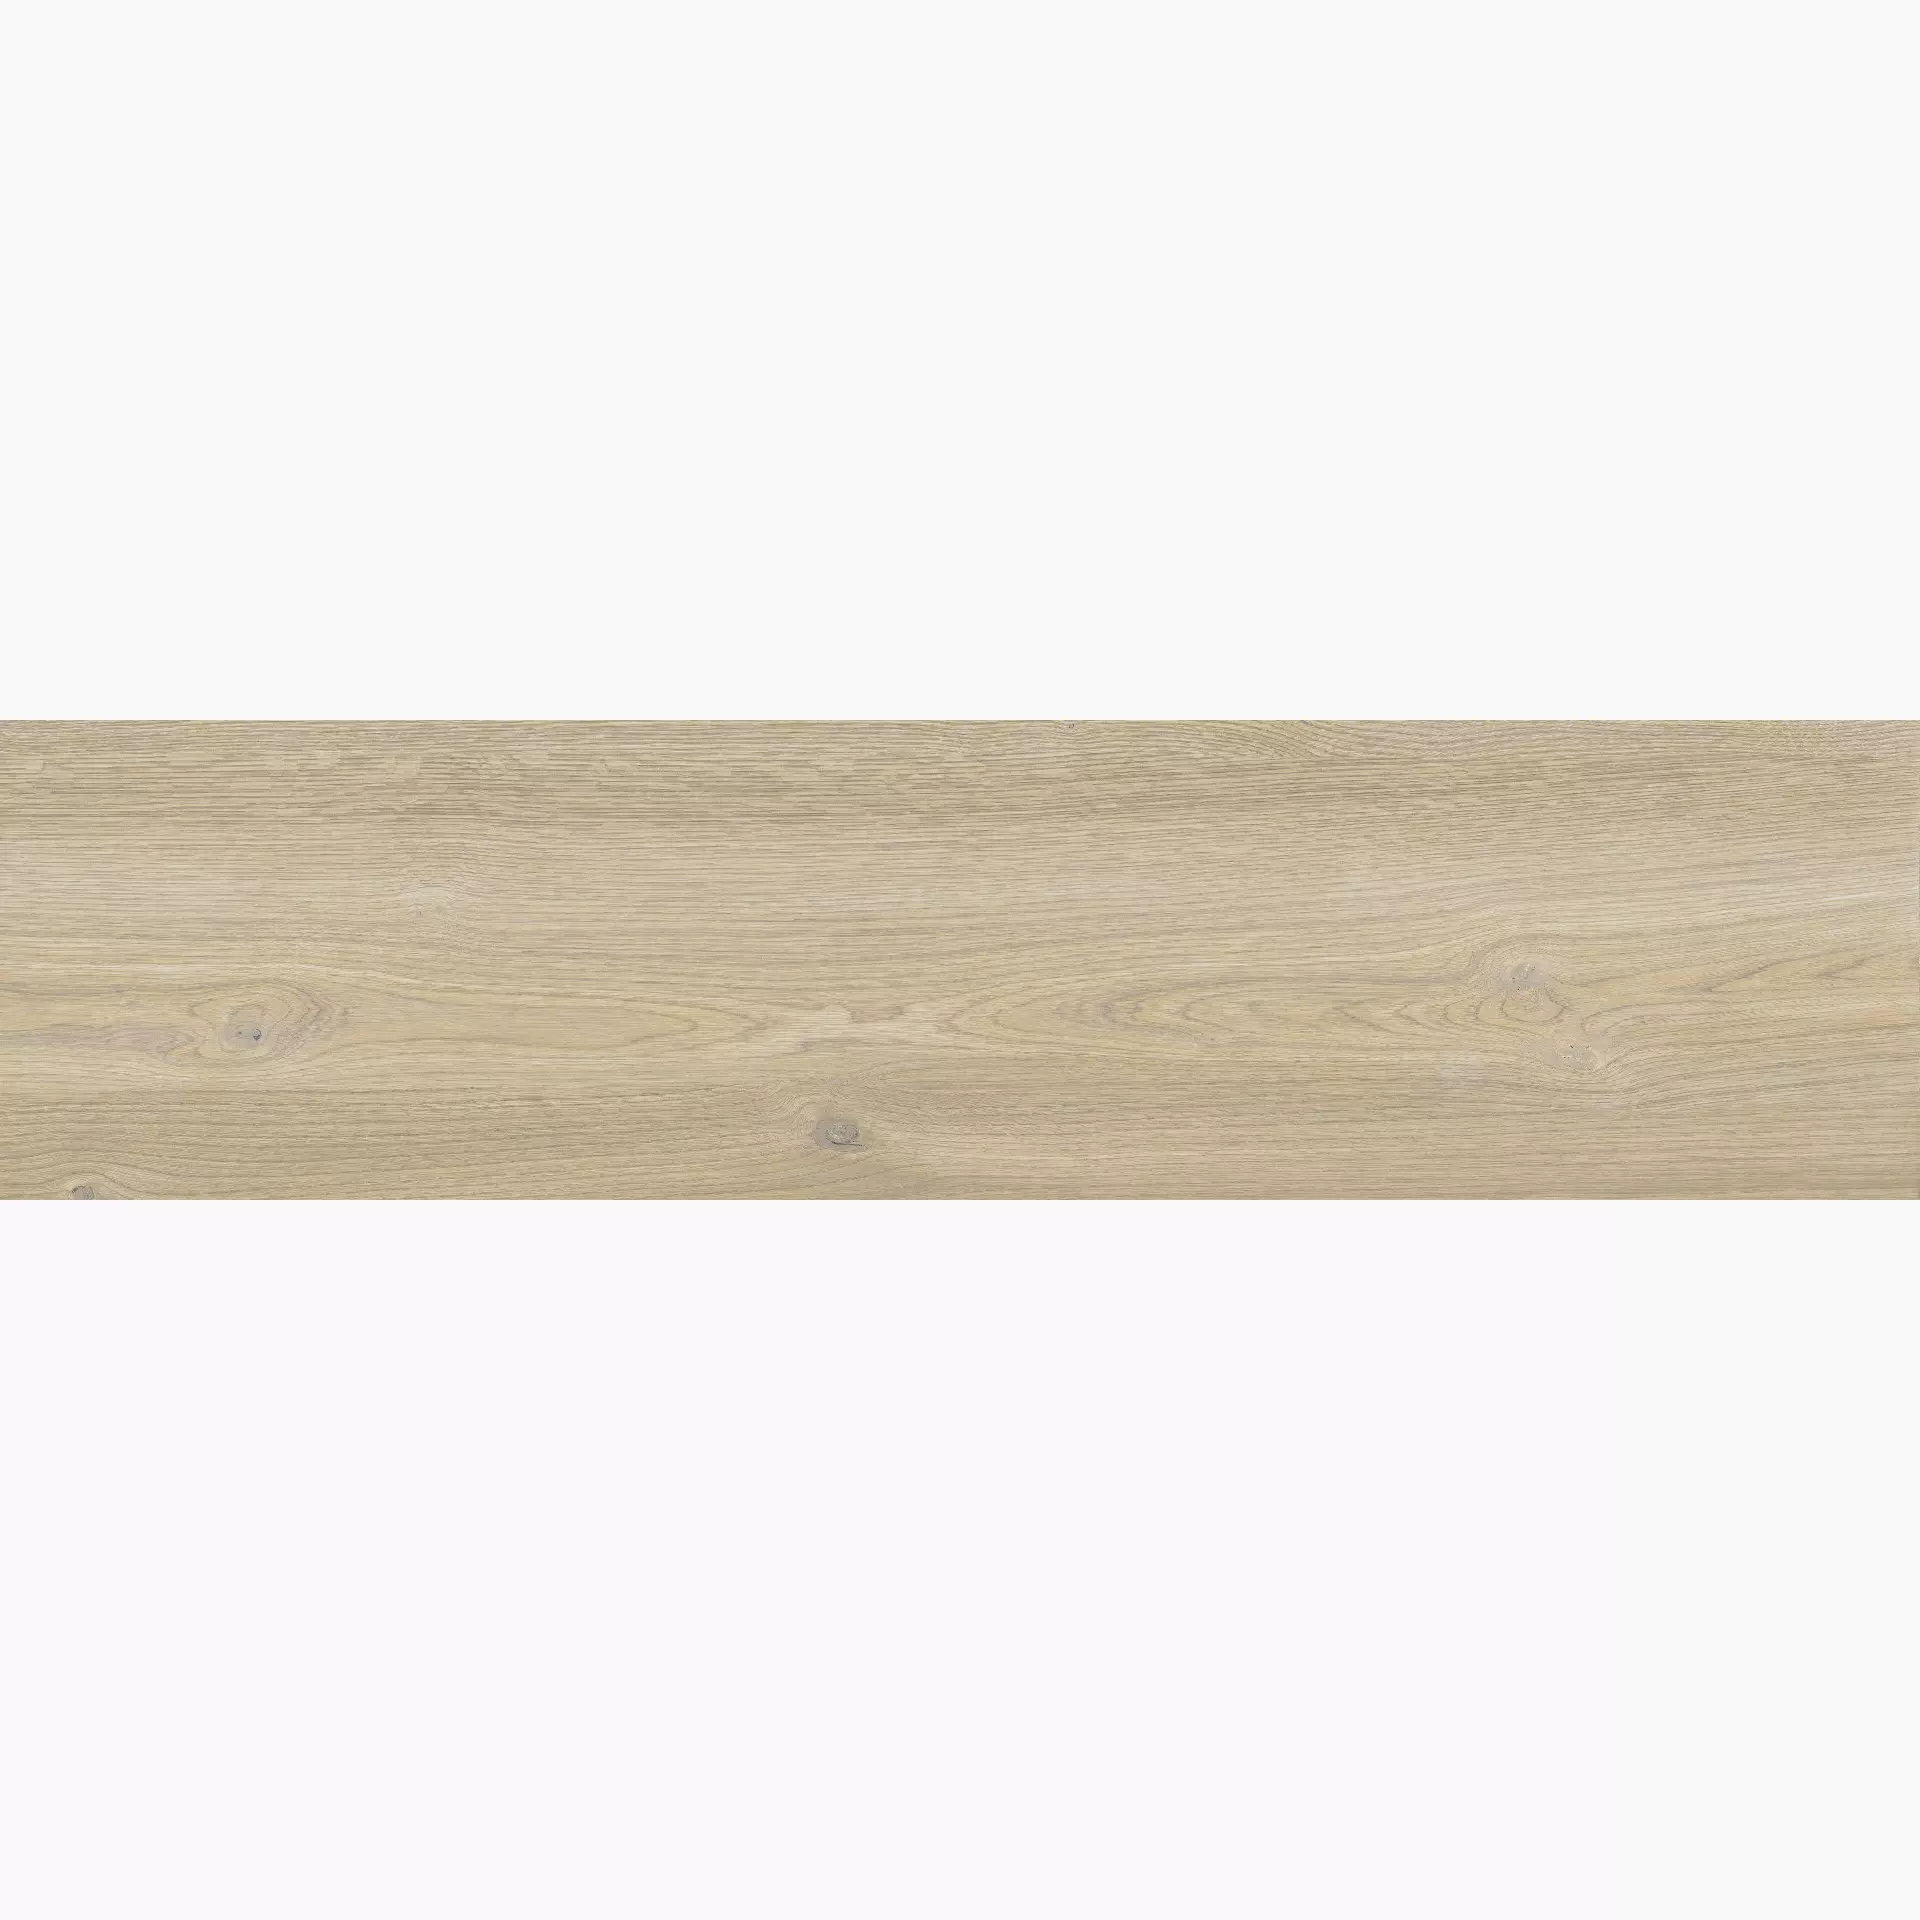 ABK Poetry Wood Gold Naturale PF60010336 30x120cm rectified 8,5mm